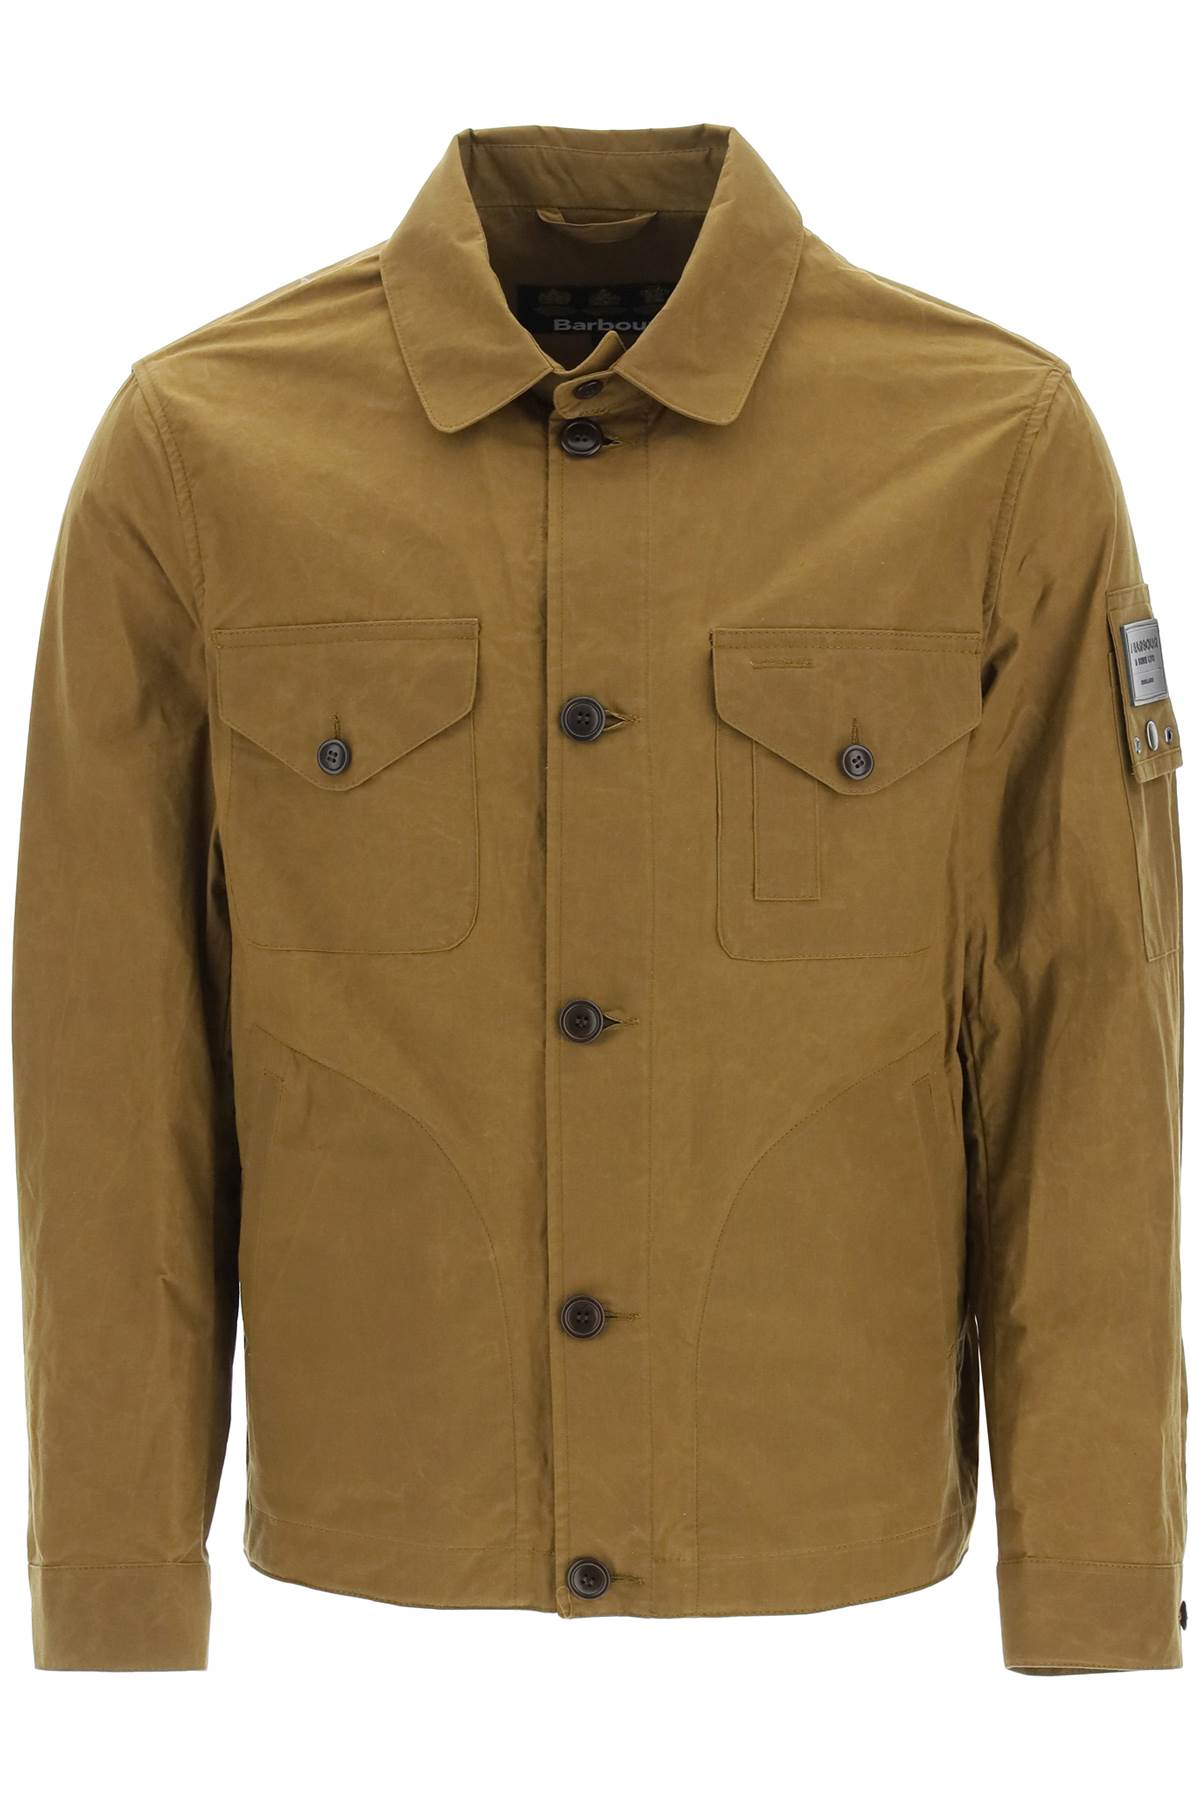 Barbour Gold Standard Porth Casual Jacket